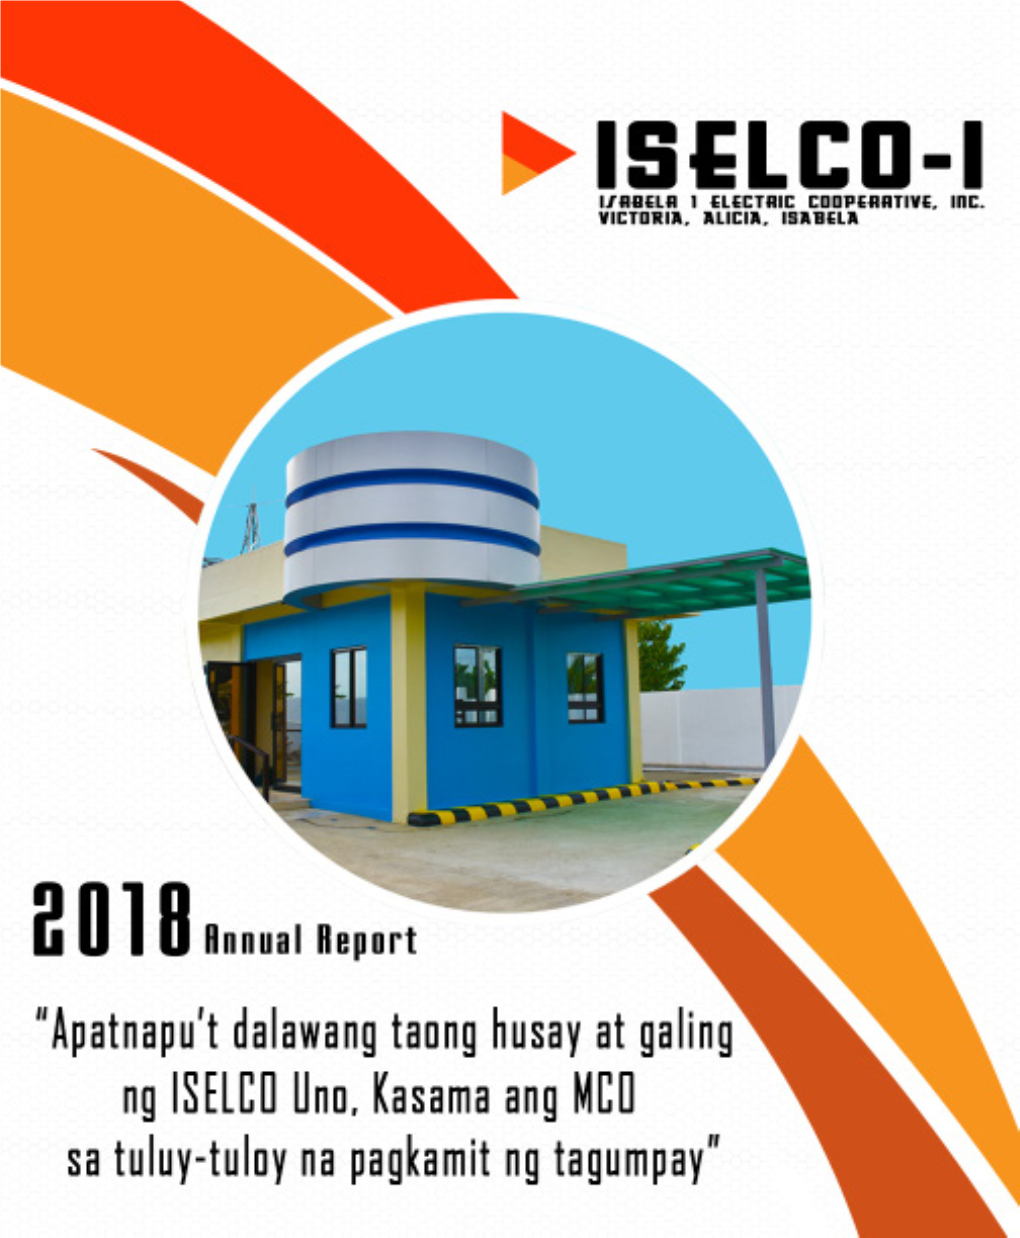 Annual Report for 2018